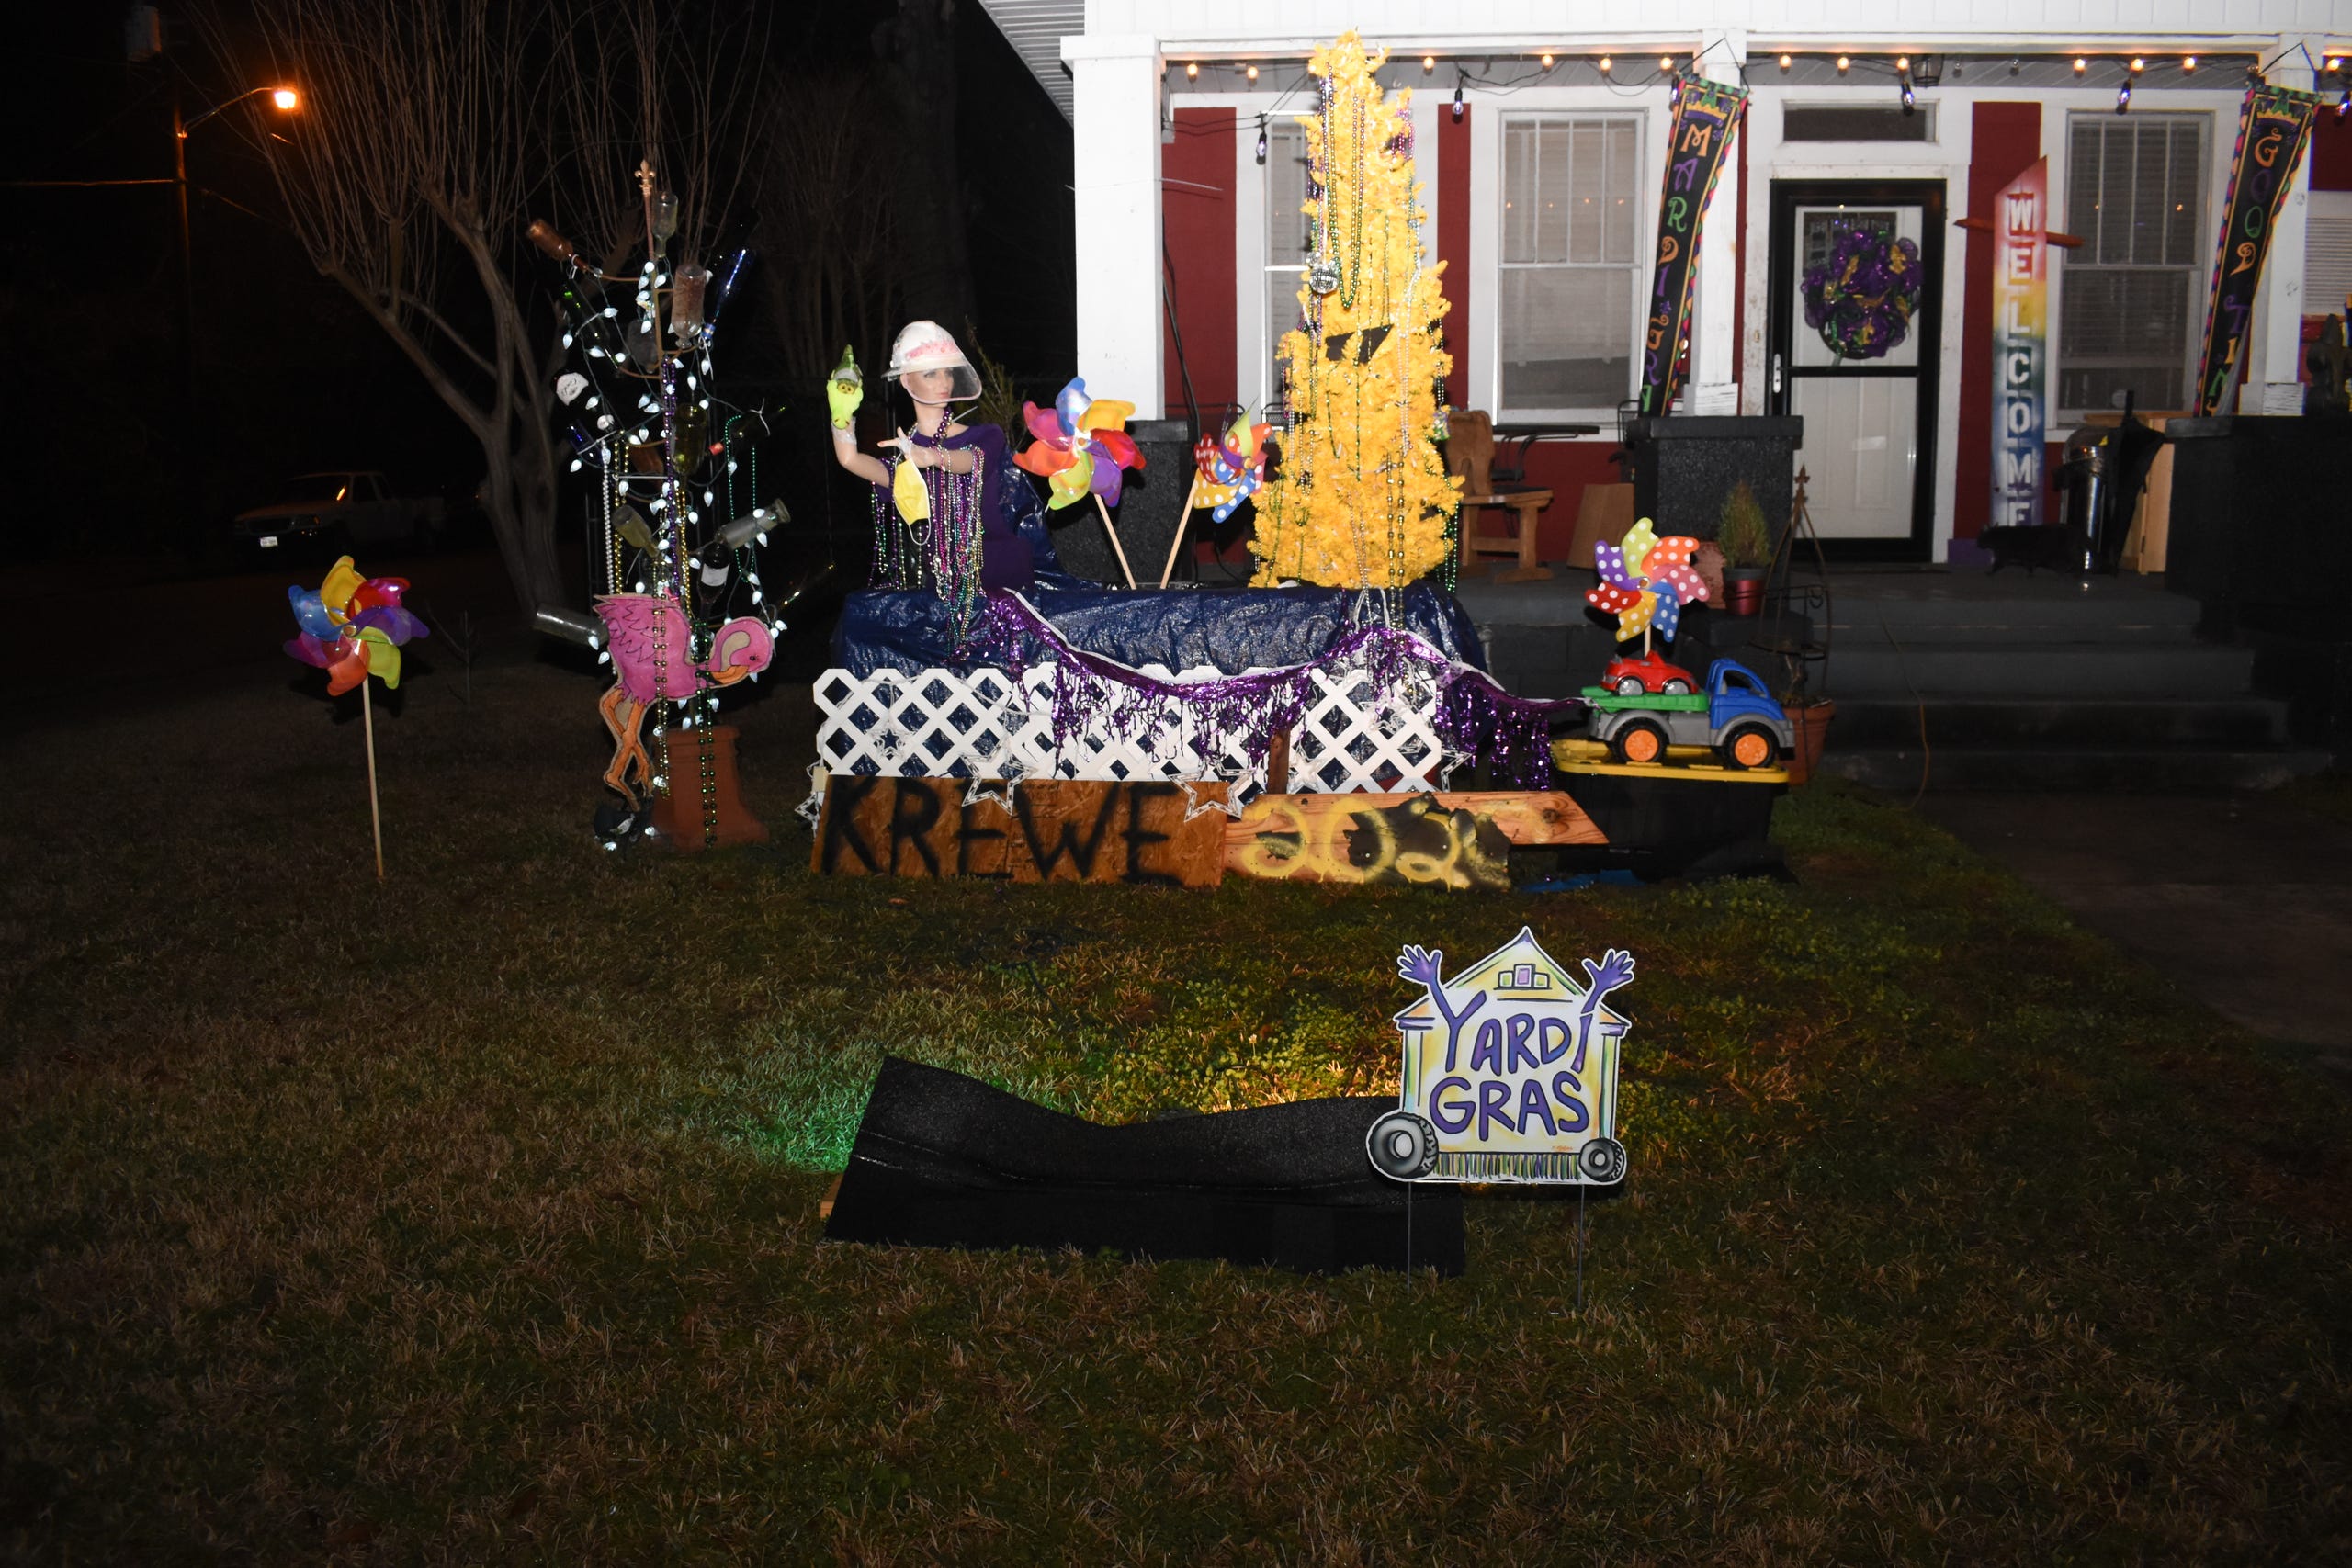 Alexandria Garden District residents D.C. Sills and Janice Williams decided to make a float in the front yard of their Polk Street home once they saw people in New Orleans decorating their houses as floats. Their house float, explainedÊSills, is more of a truck parade kind of floatÊthan a krewe parade float.